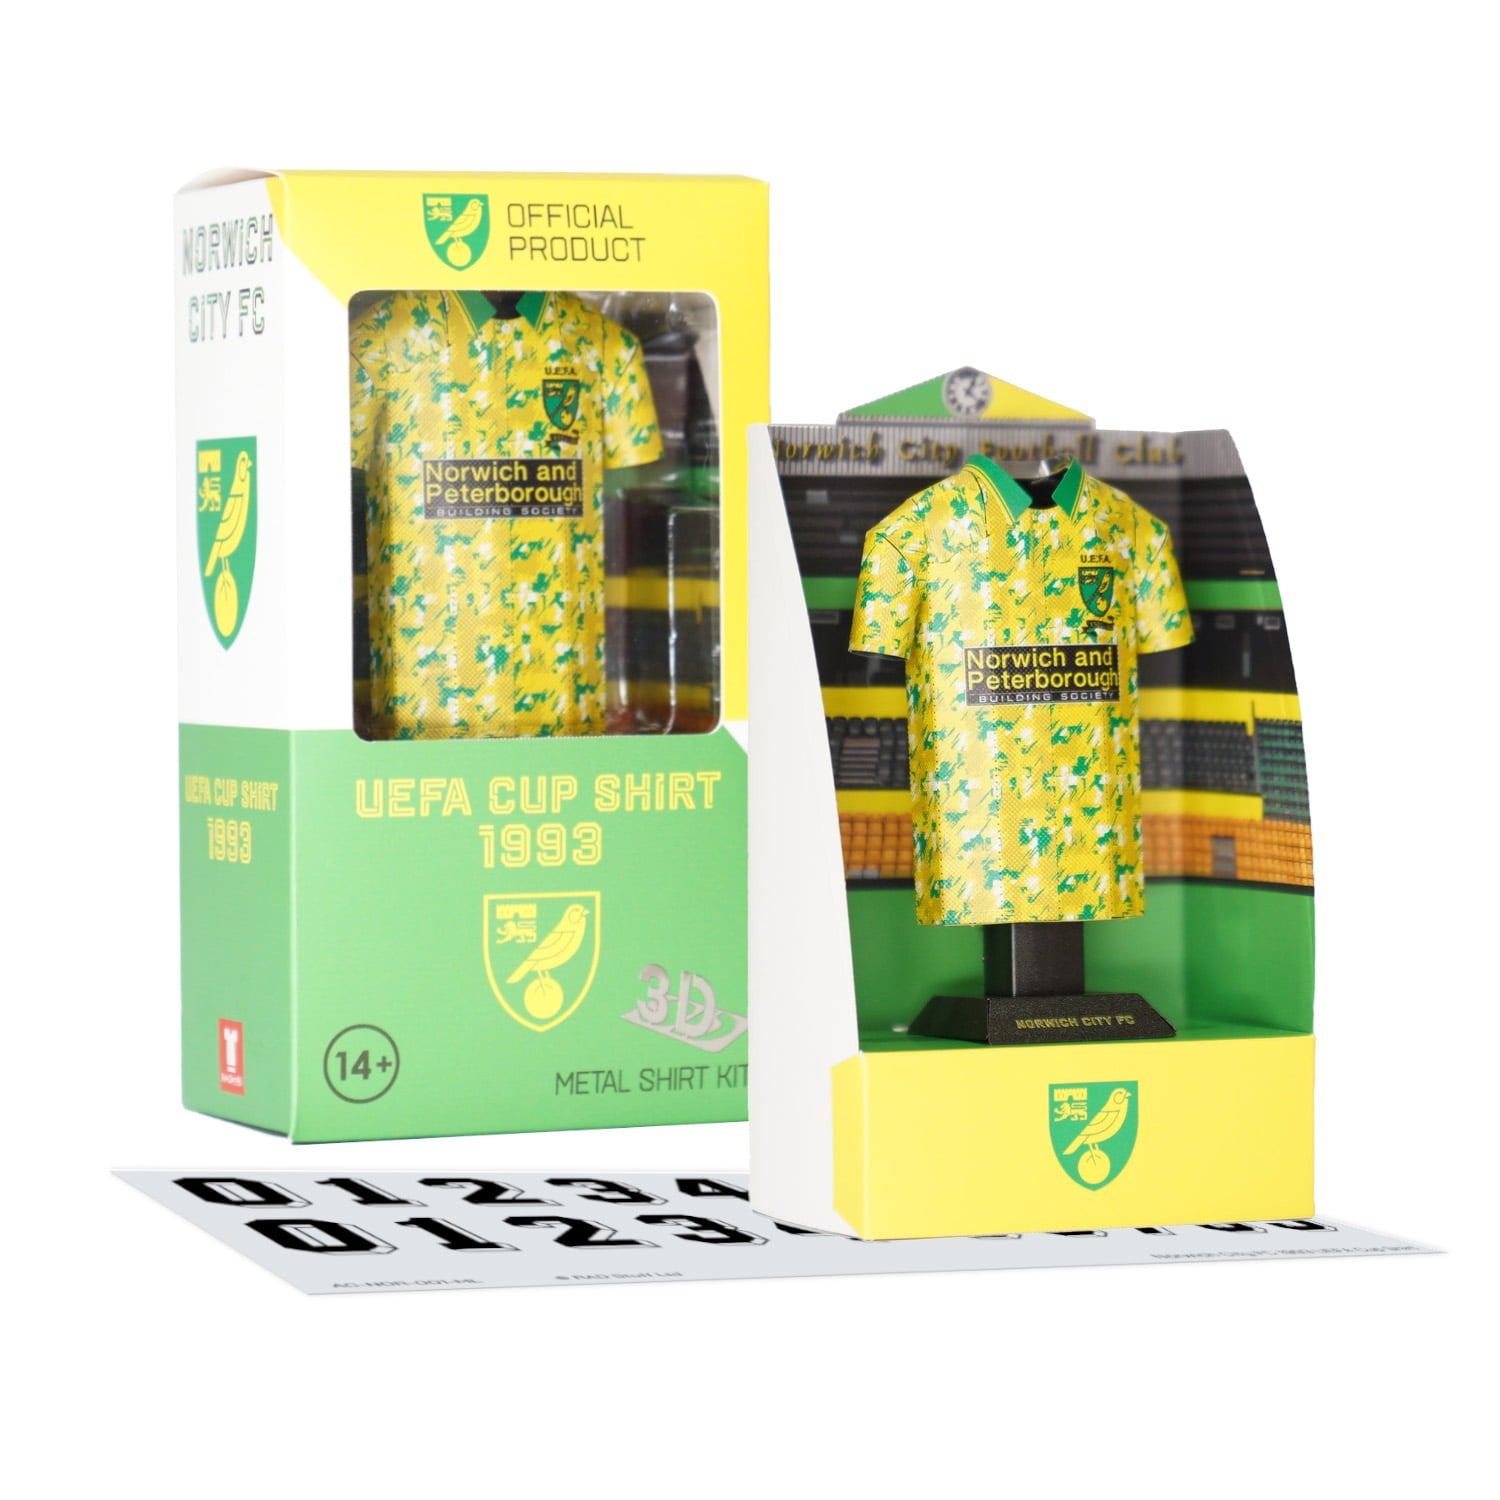 Norwich City 1993 UEFA Cup collectible in display